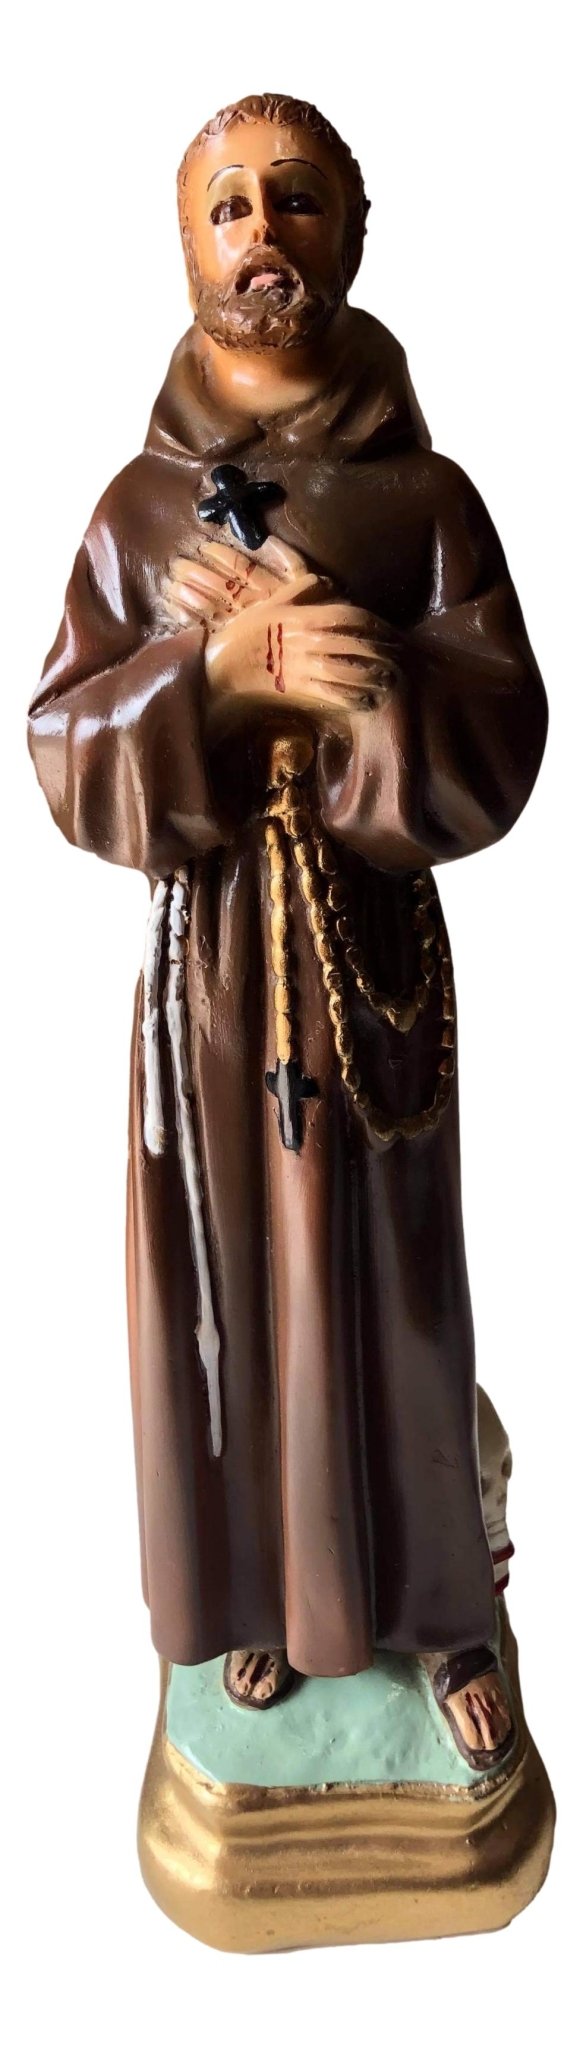 Statue Saint Francis Chalkware Italy Columbia Statuary 13 in. Tall - Ysleta Mission Gift Shop- VOTED El Paso's Best Gift Shop